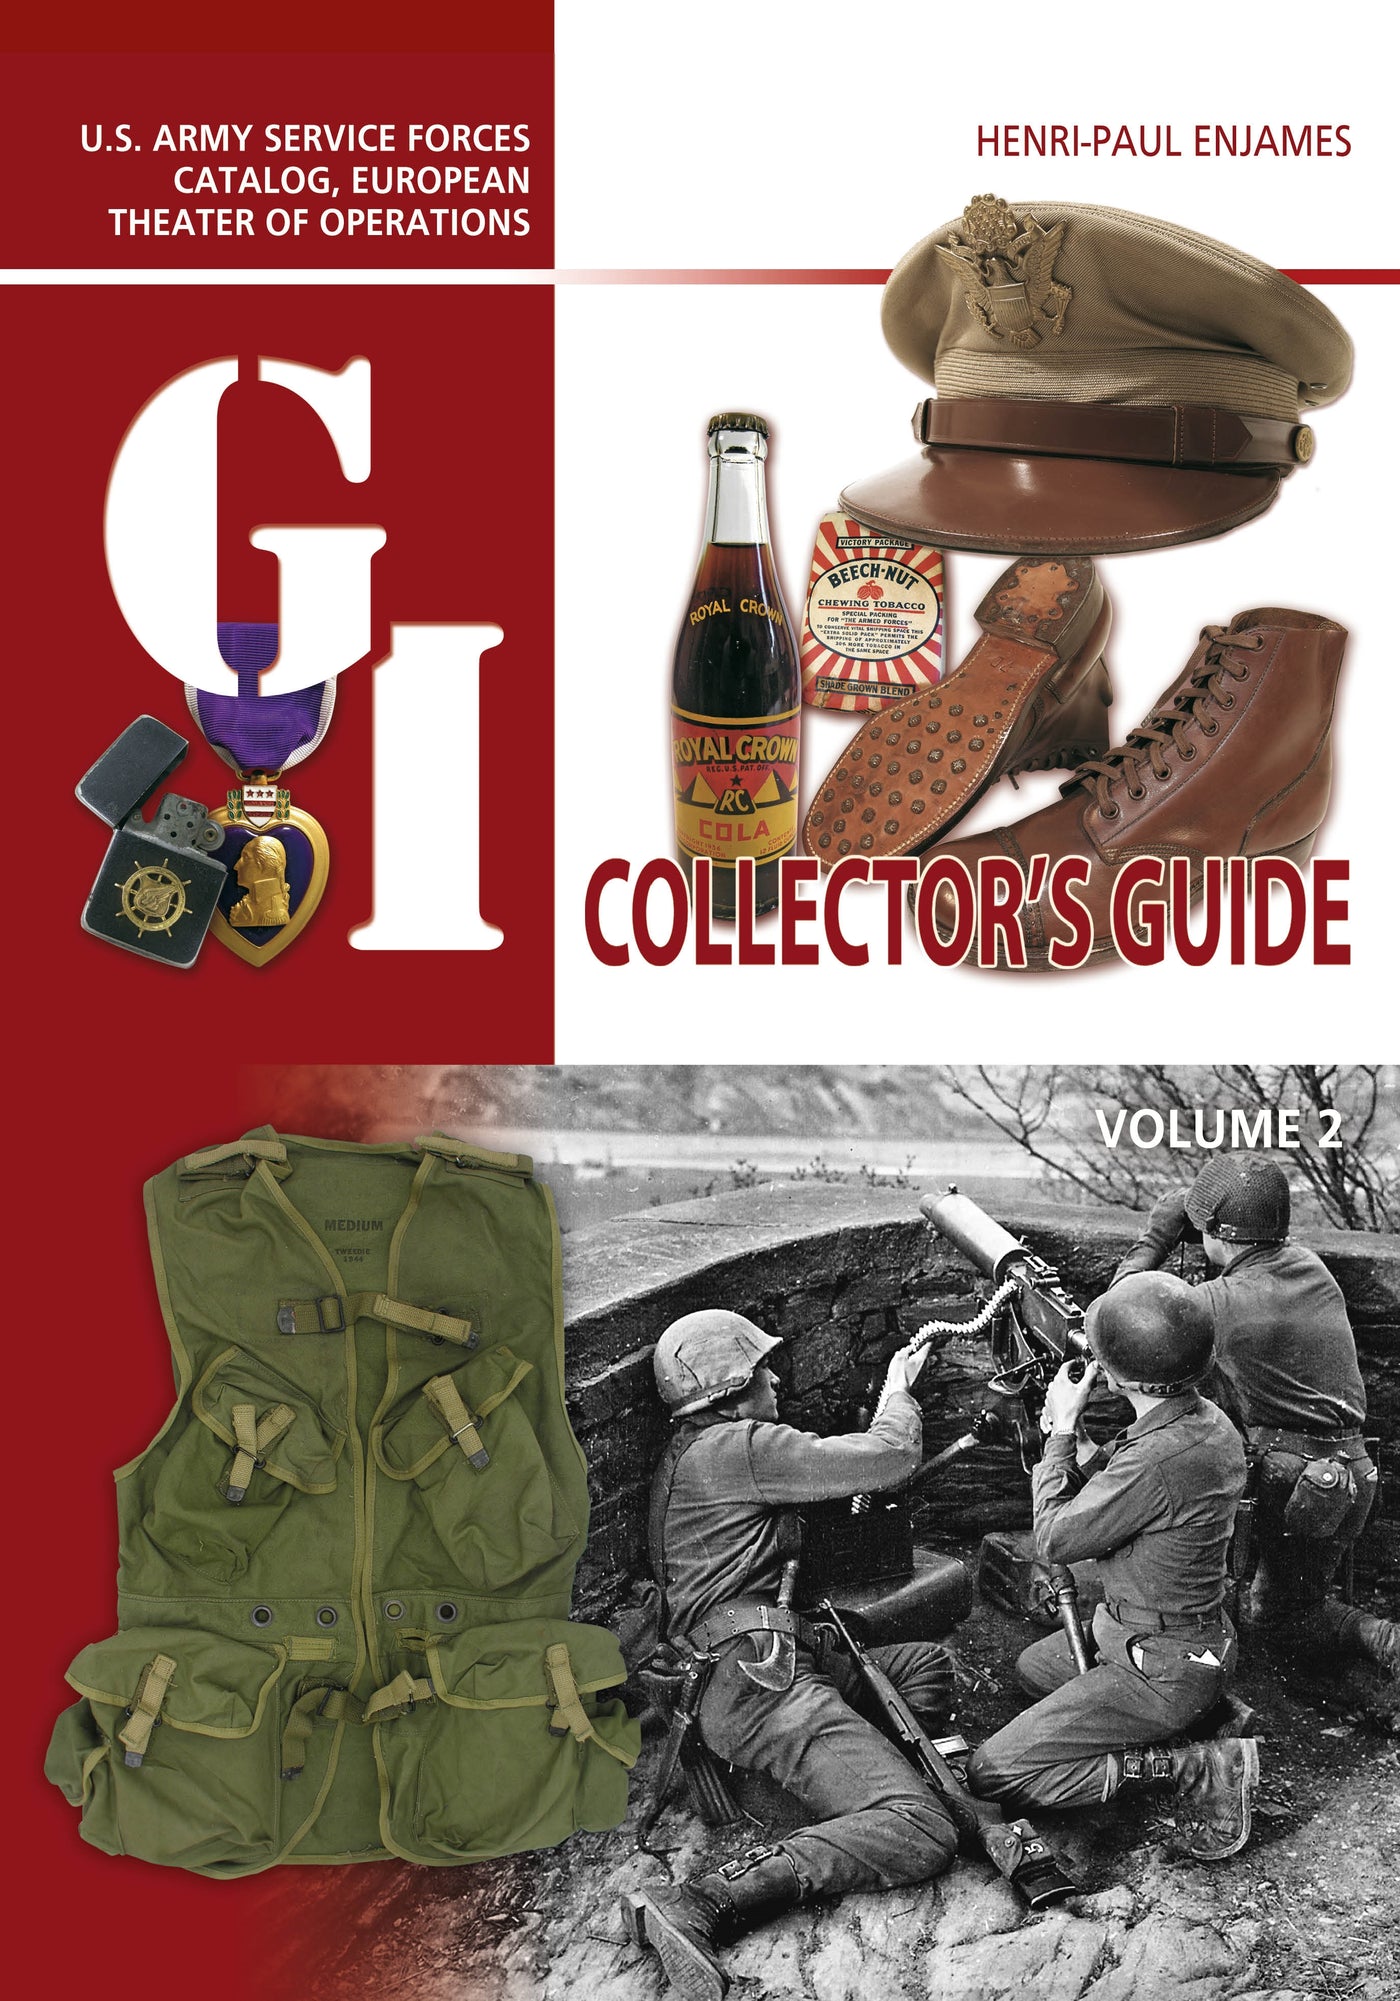 The G.I. Collector's Guide: U.S. Army Service Forces Catalog, European Theater of Operations VOLUME 2